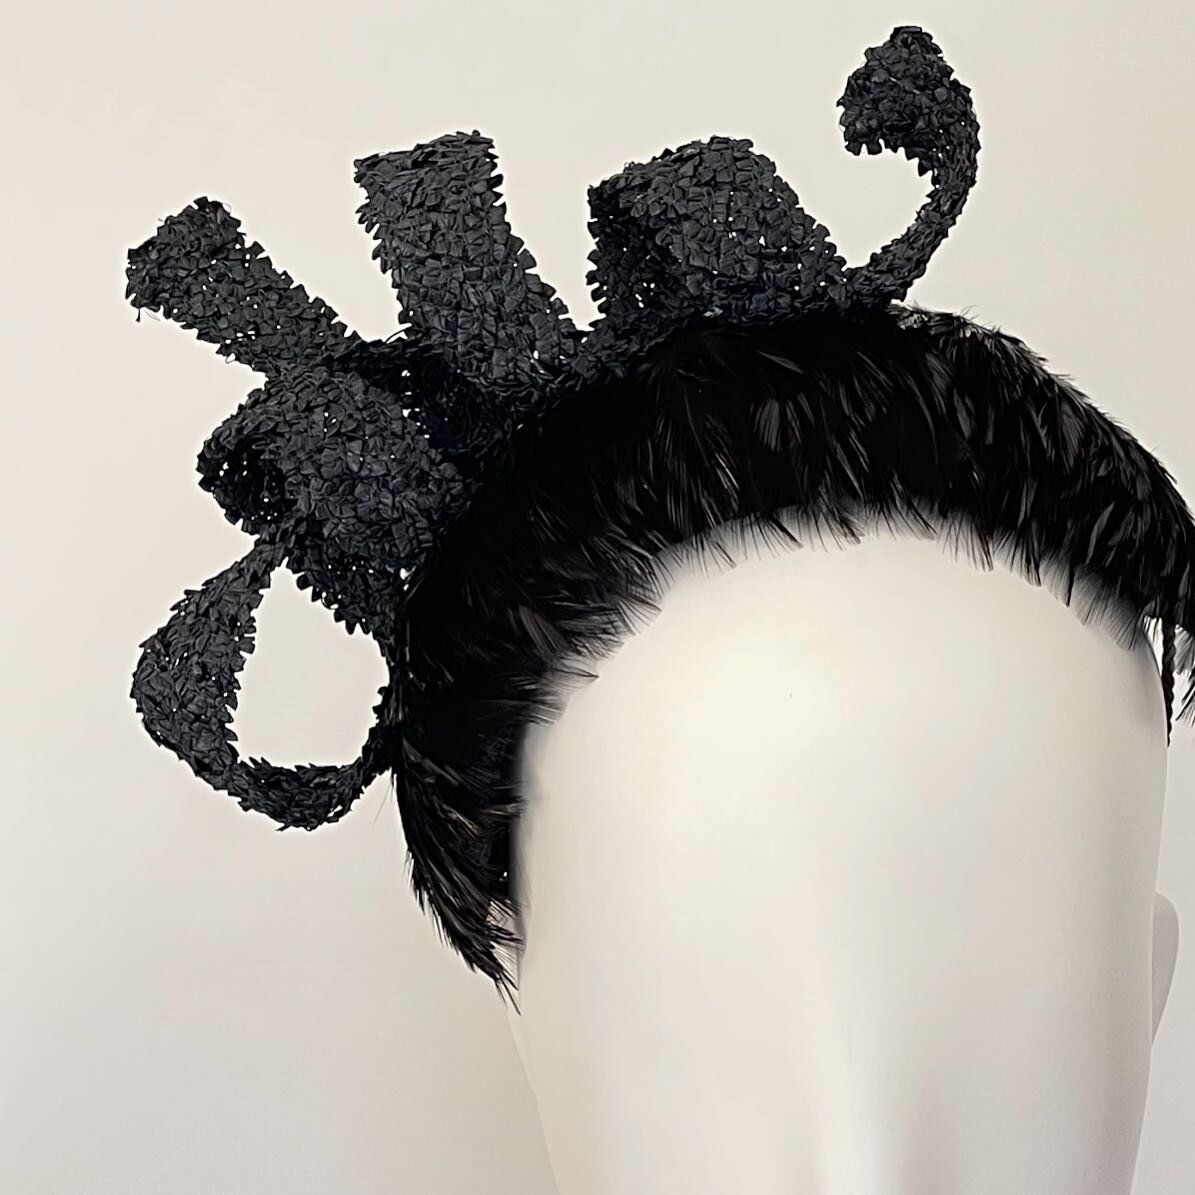 Just can&rsquo;t get feathers with sheen like this anymore. 
Easy wearing bandeau 

#featherheadpiece #slowfashion #slowfashionmovement  #transeasonal #millinery #headpiece #fascinators #fashionattheraces #accessories